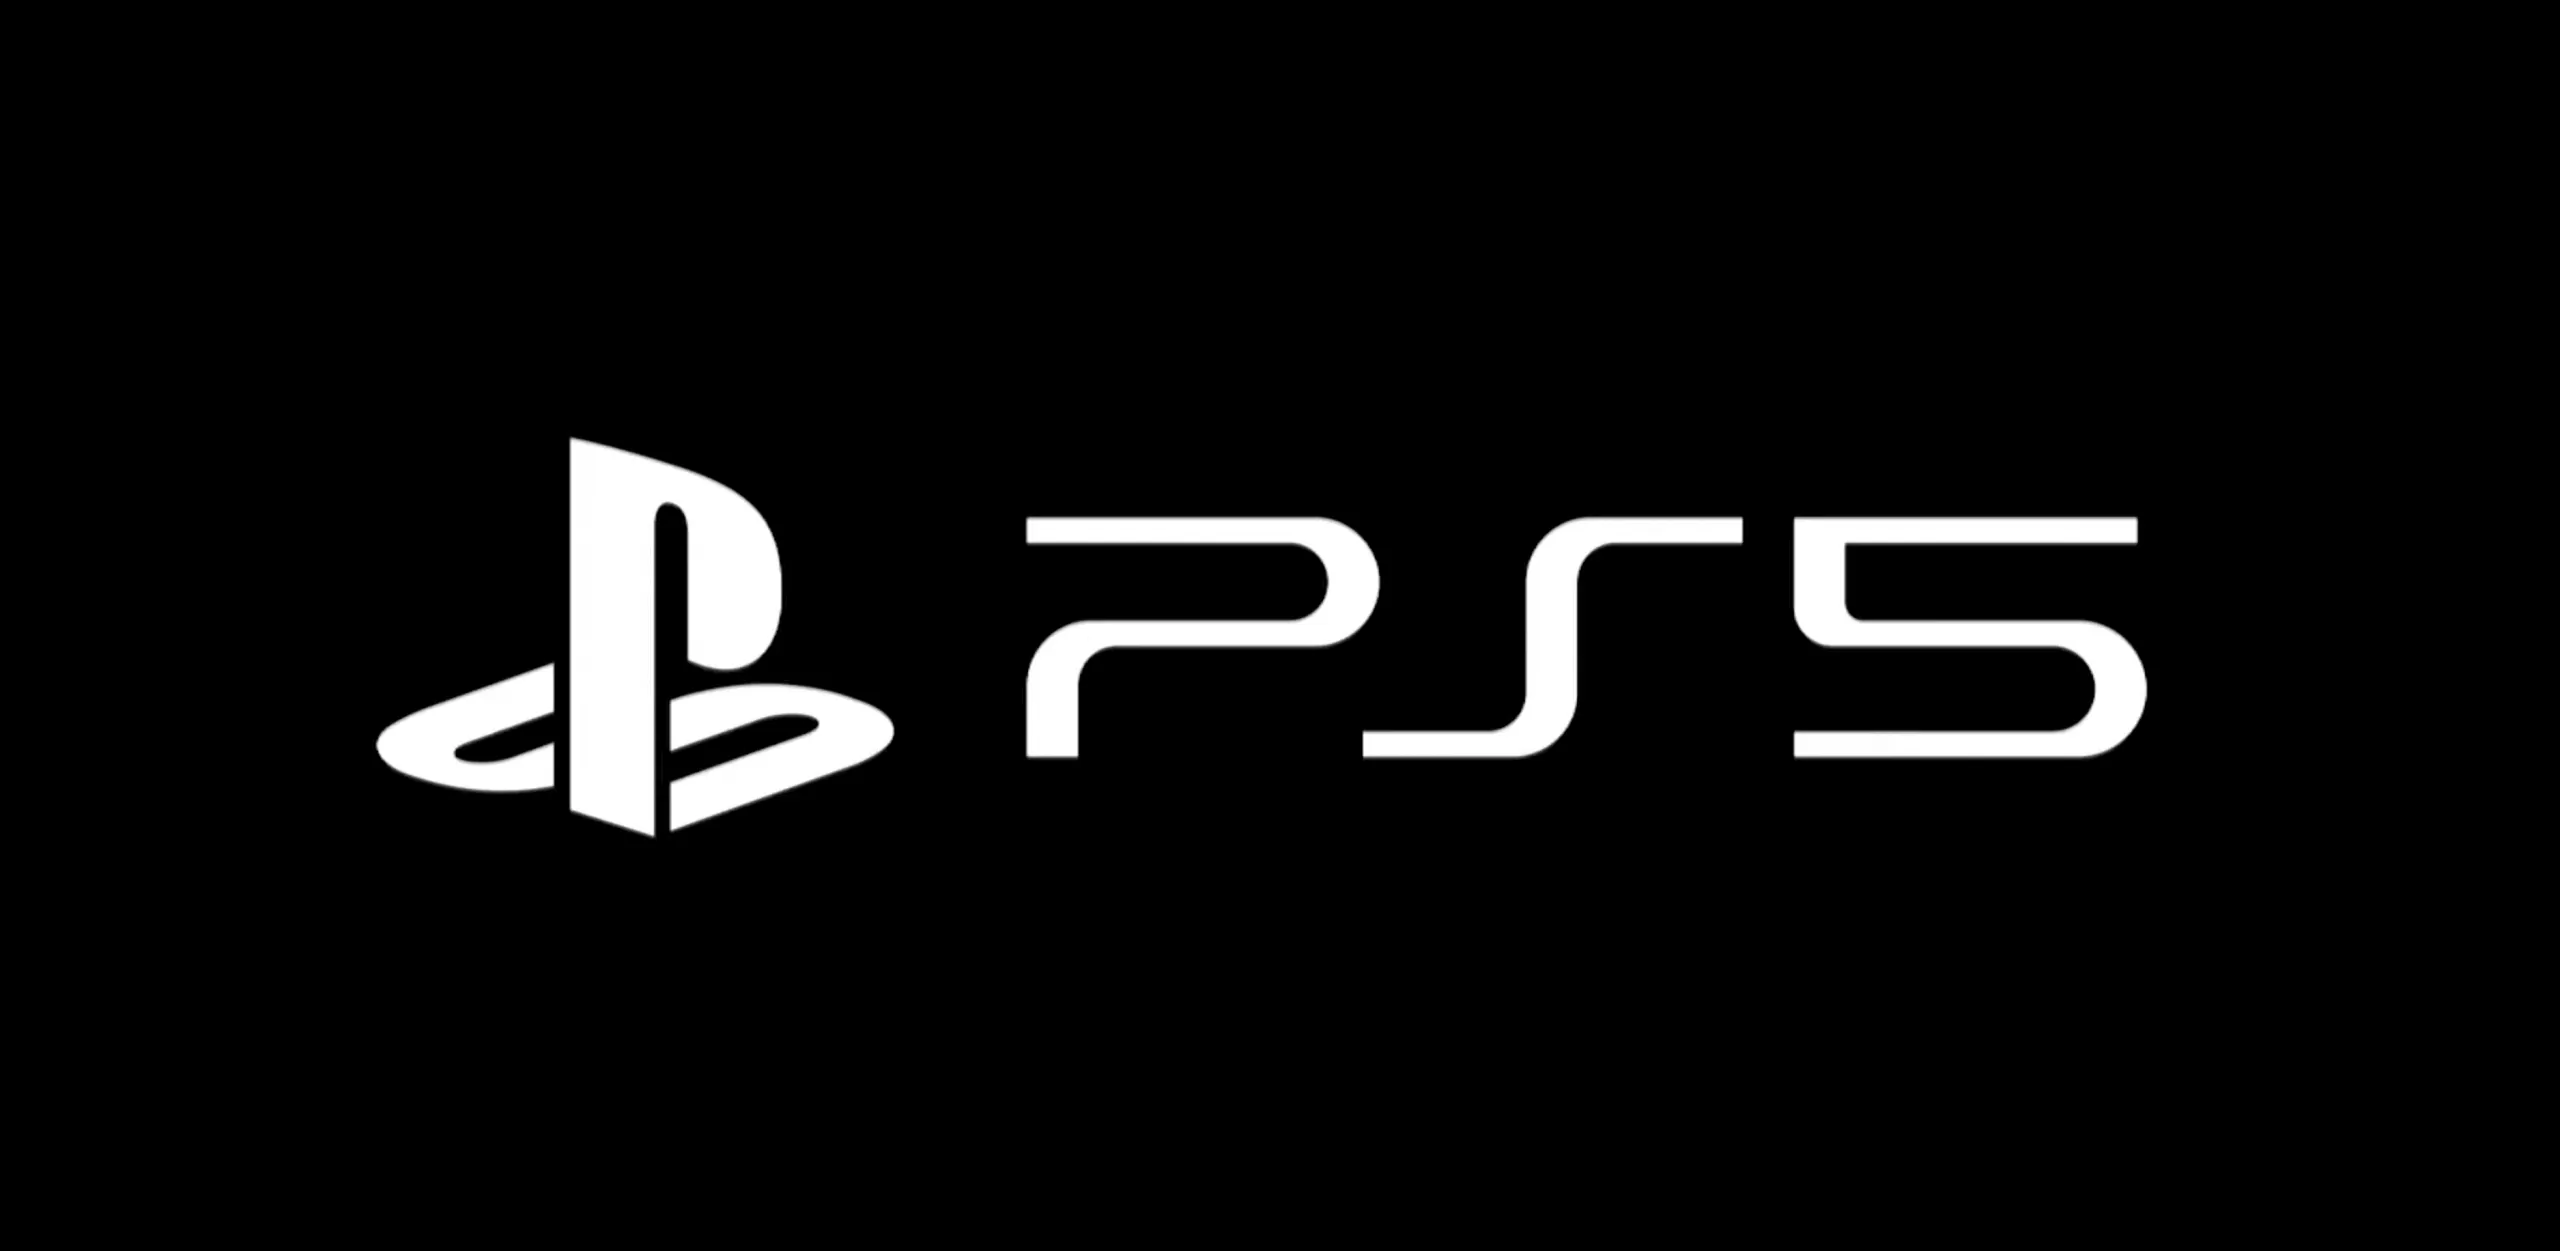 Sony reveals PlayStation 5 specifications, including support for internal NVMe SSD upgrades